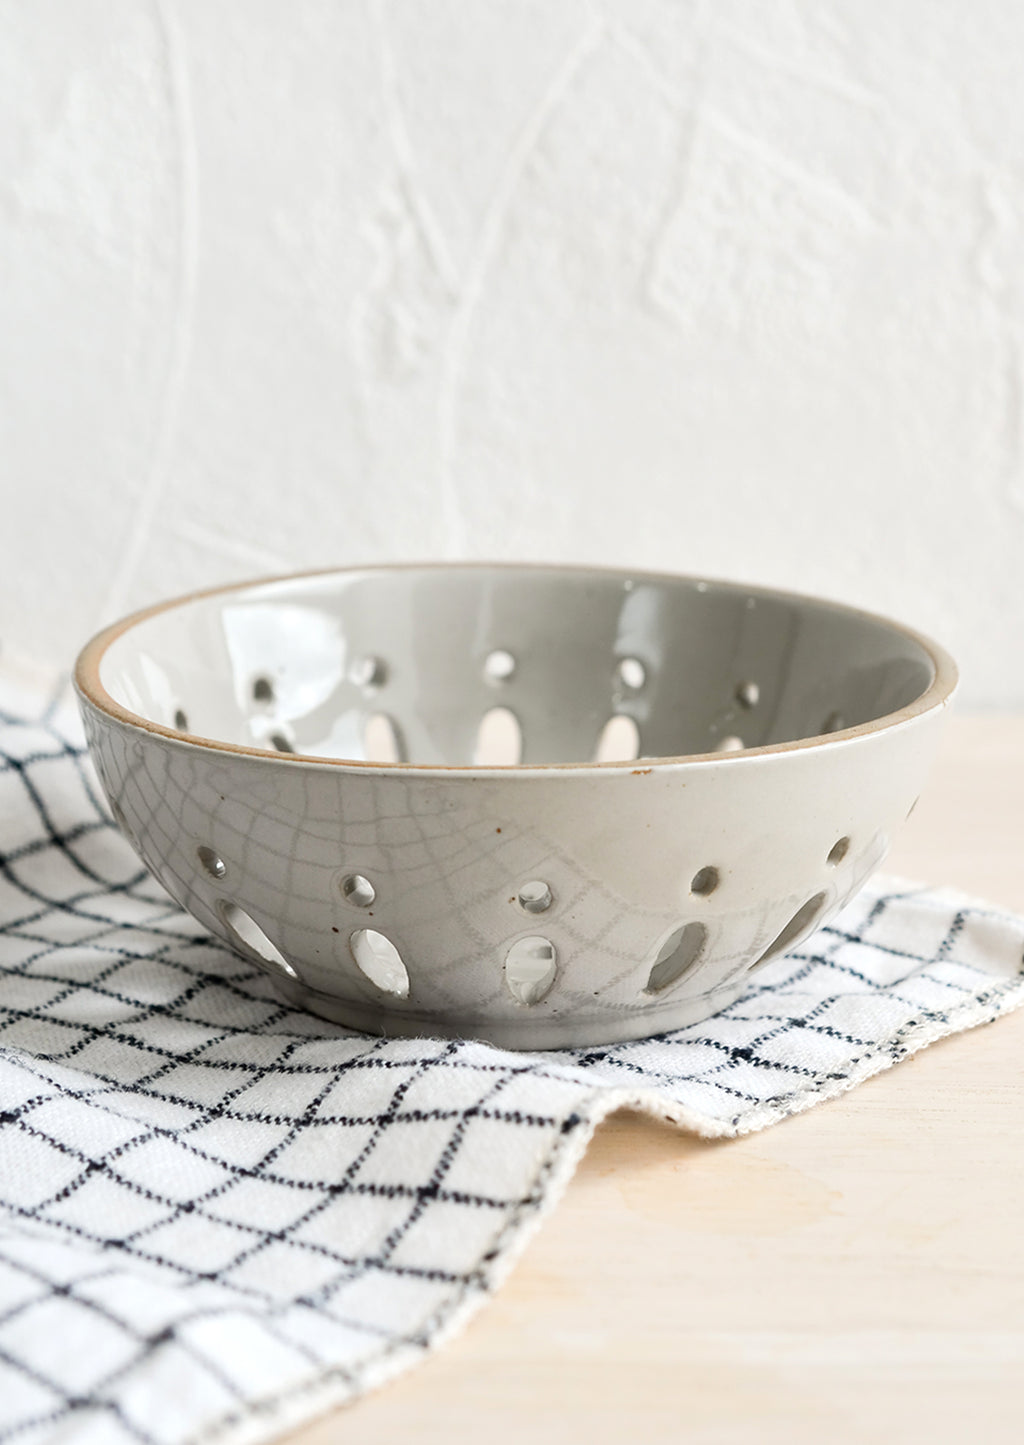 Pale Grey: A ceramic berry bowl with drainage holes in pale grey.